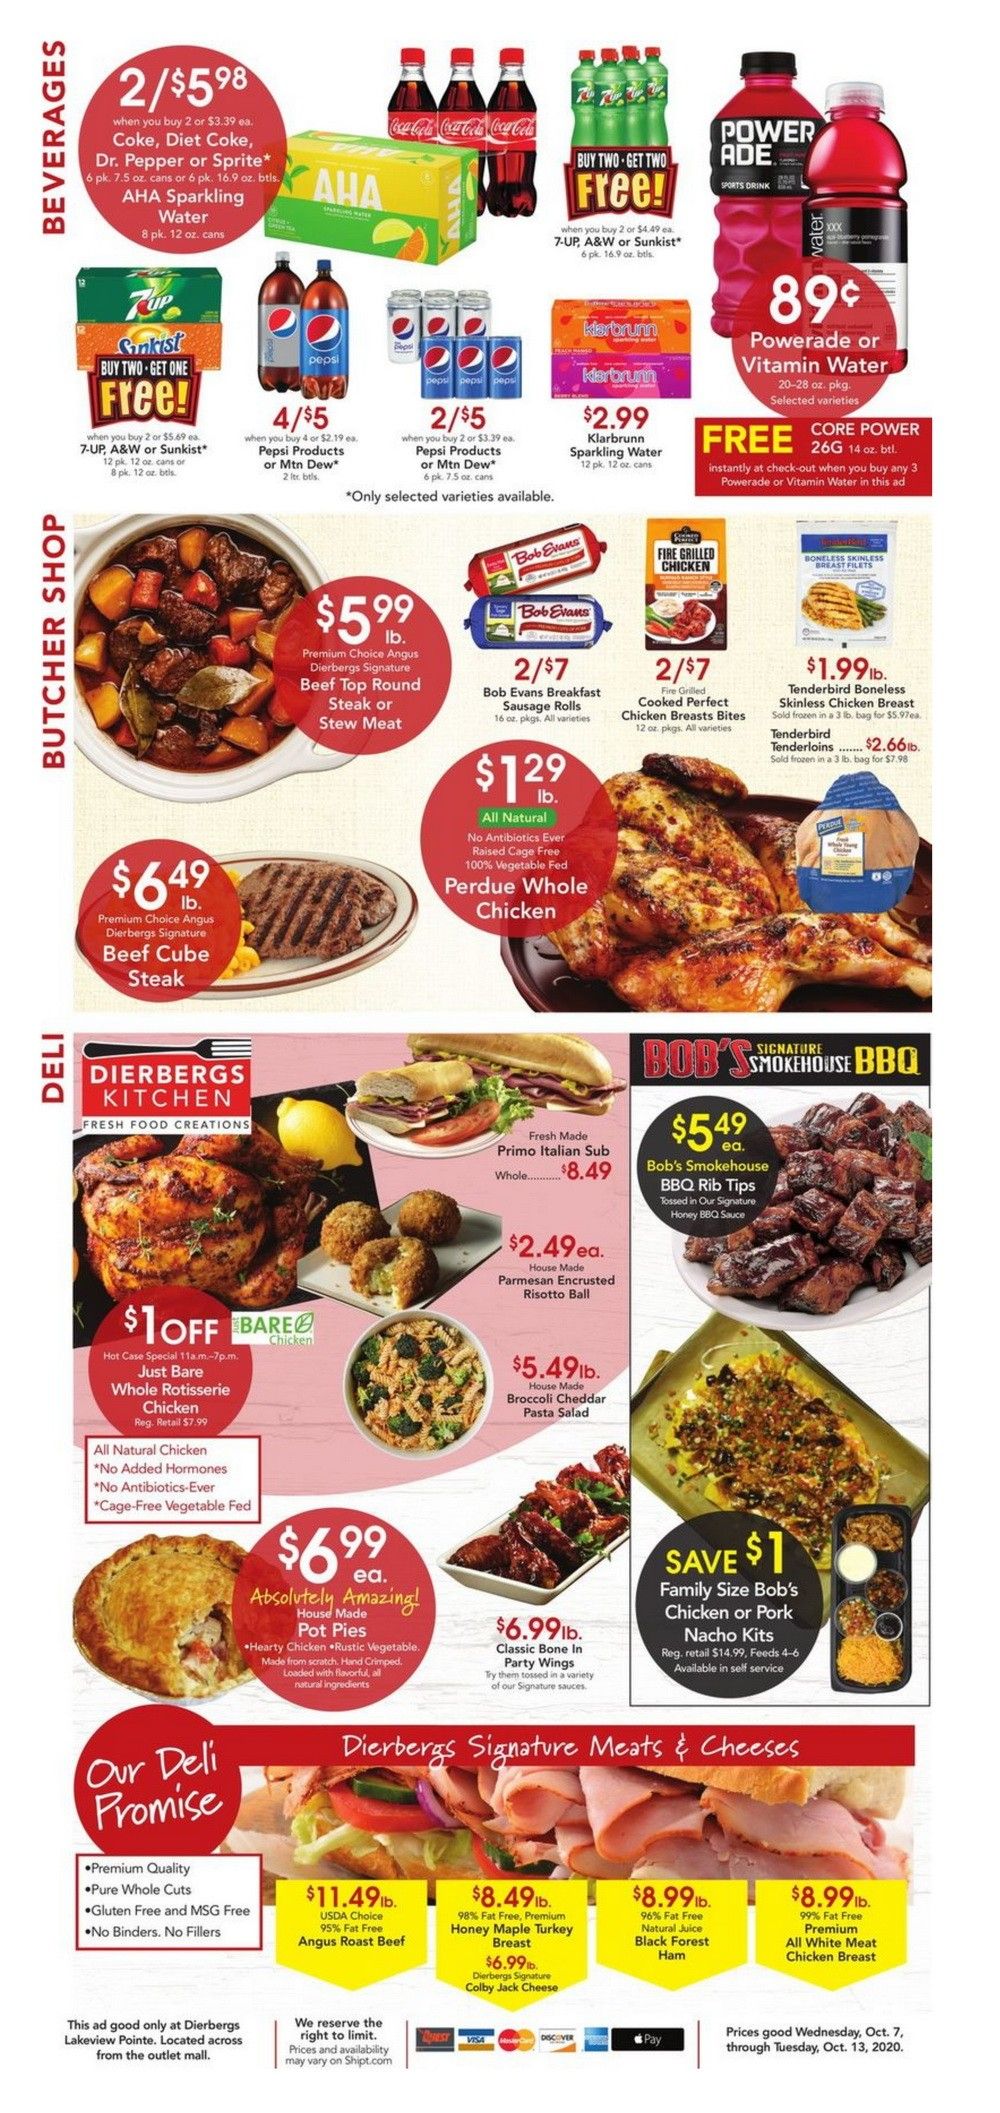 Dierbergs Markets Weekly Ad Oct 07 – Oct 13, 2020